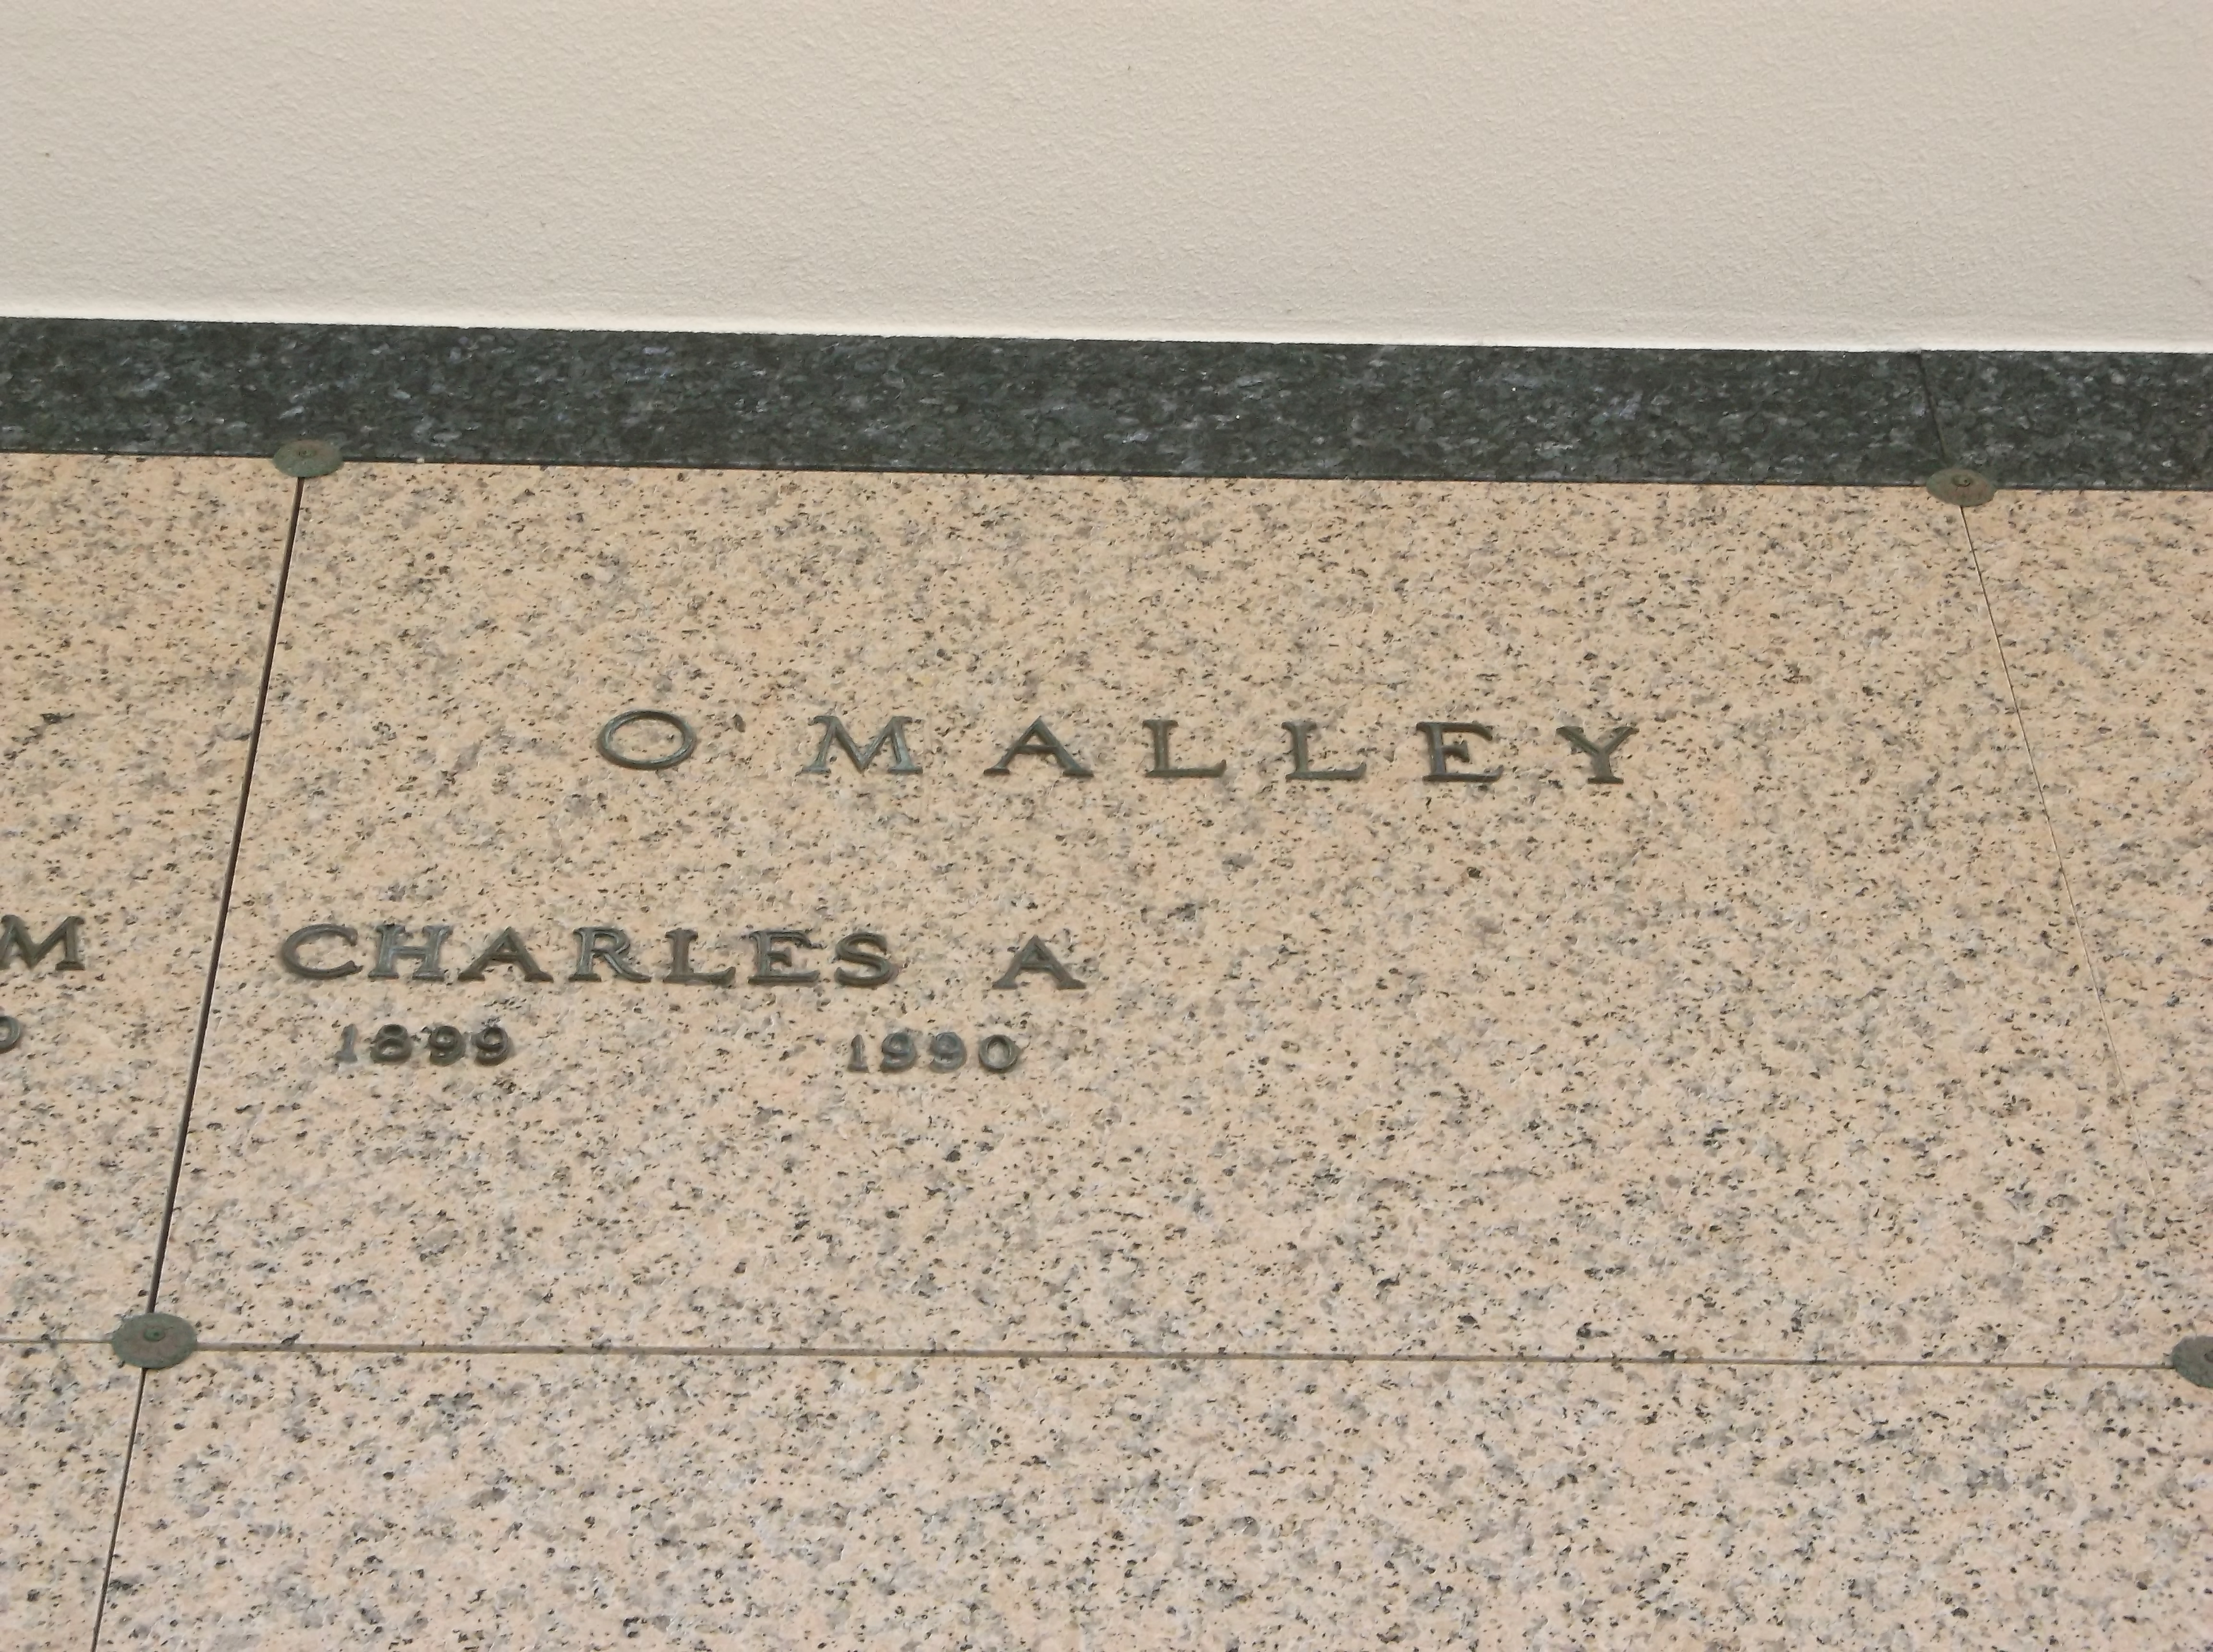 Charles A O'Malley